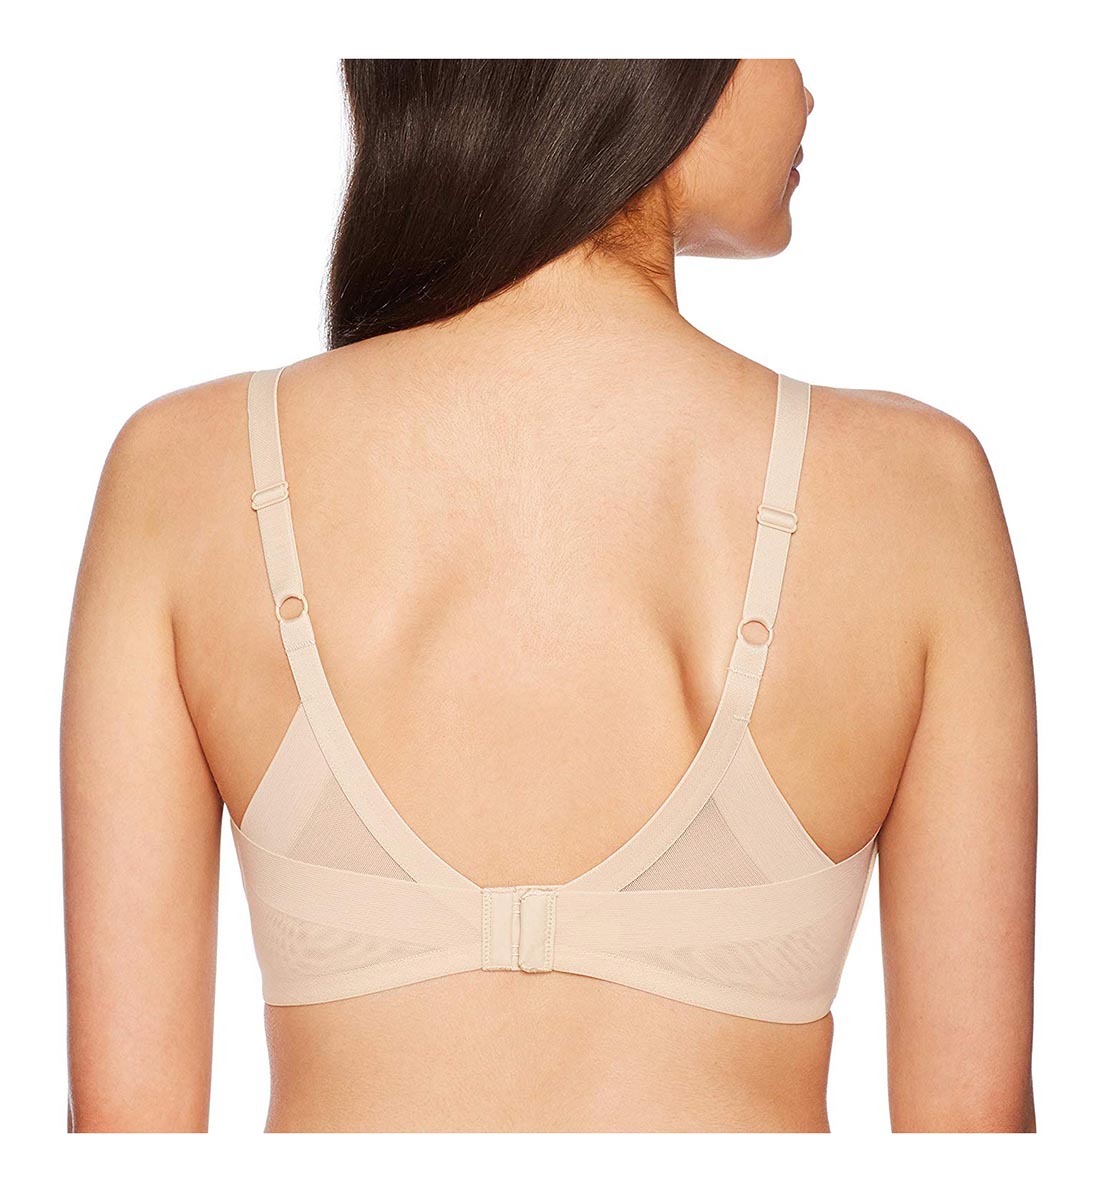 Wacoal Ultimate Side Smoother Wire Free Contour T-Shirt Bra (852281)- Sand